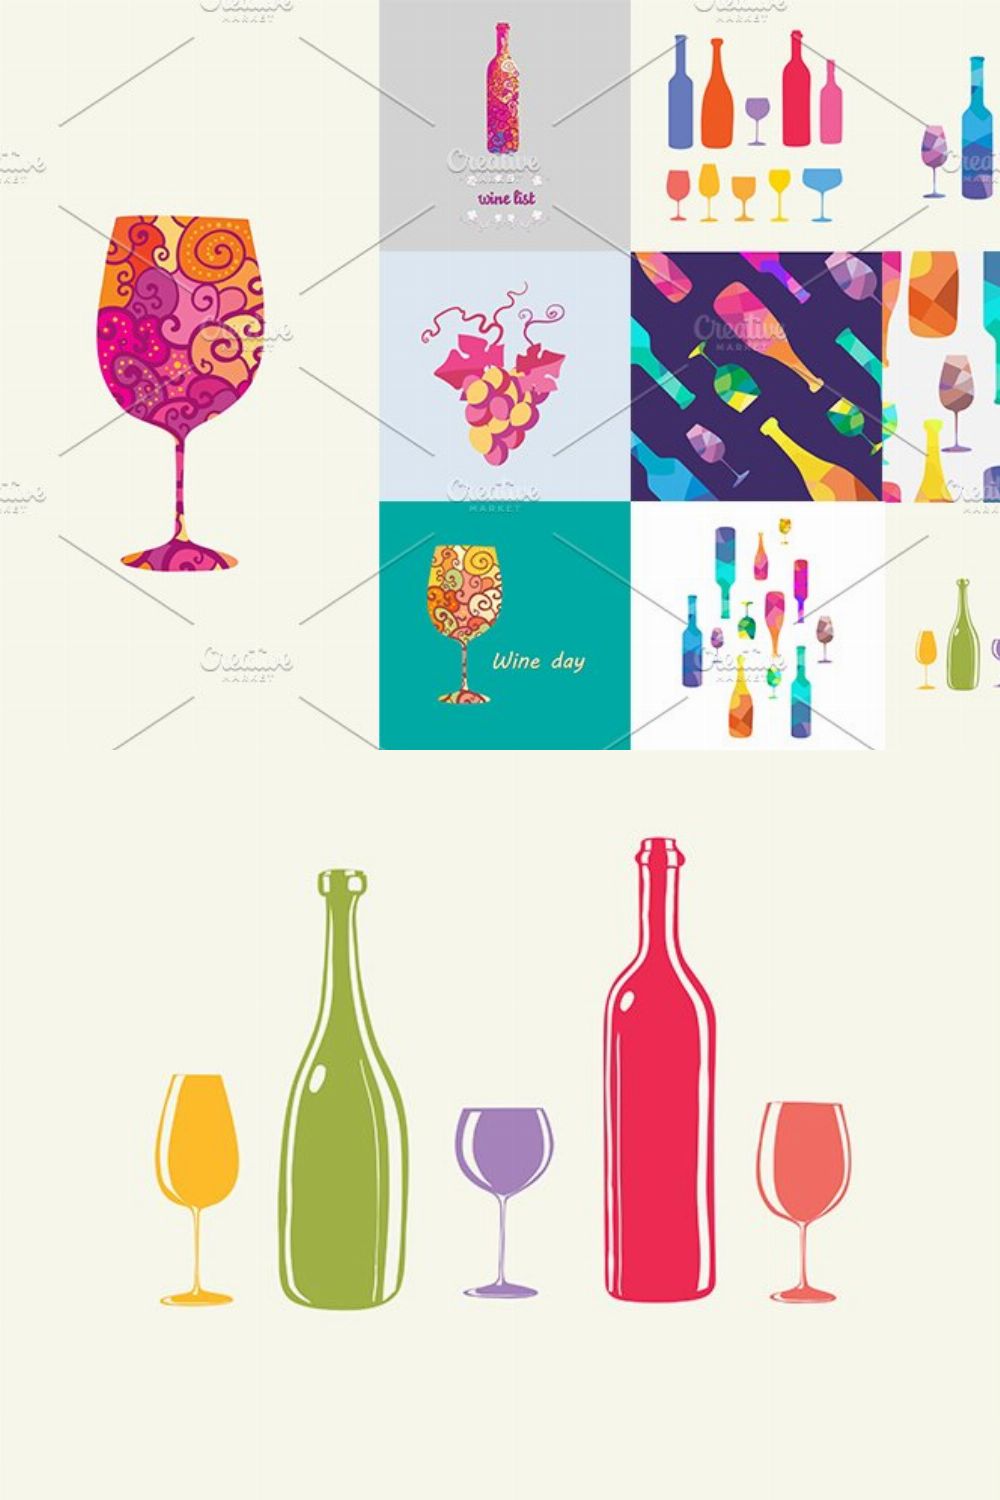 Wine bottle and a wineglasses pinterest preview image.